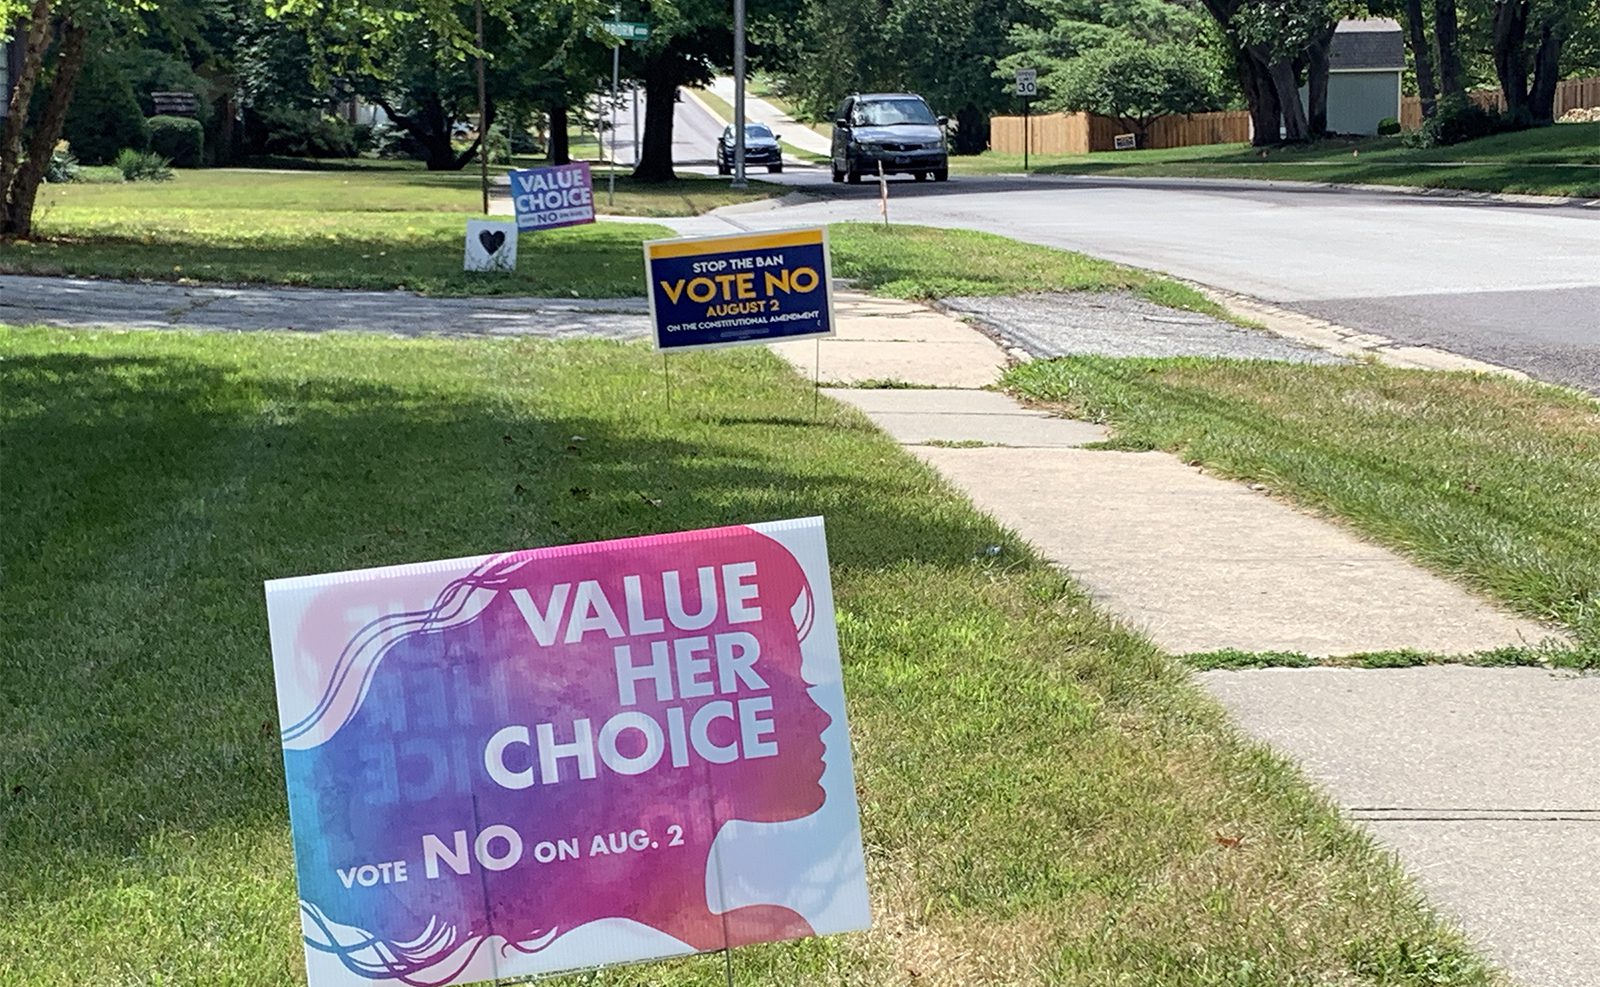 Signs opposing Amendment 2 line a street in Overland Park, Kansas, July 27, 2022. RNS photo by Kit Doyle